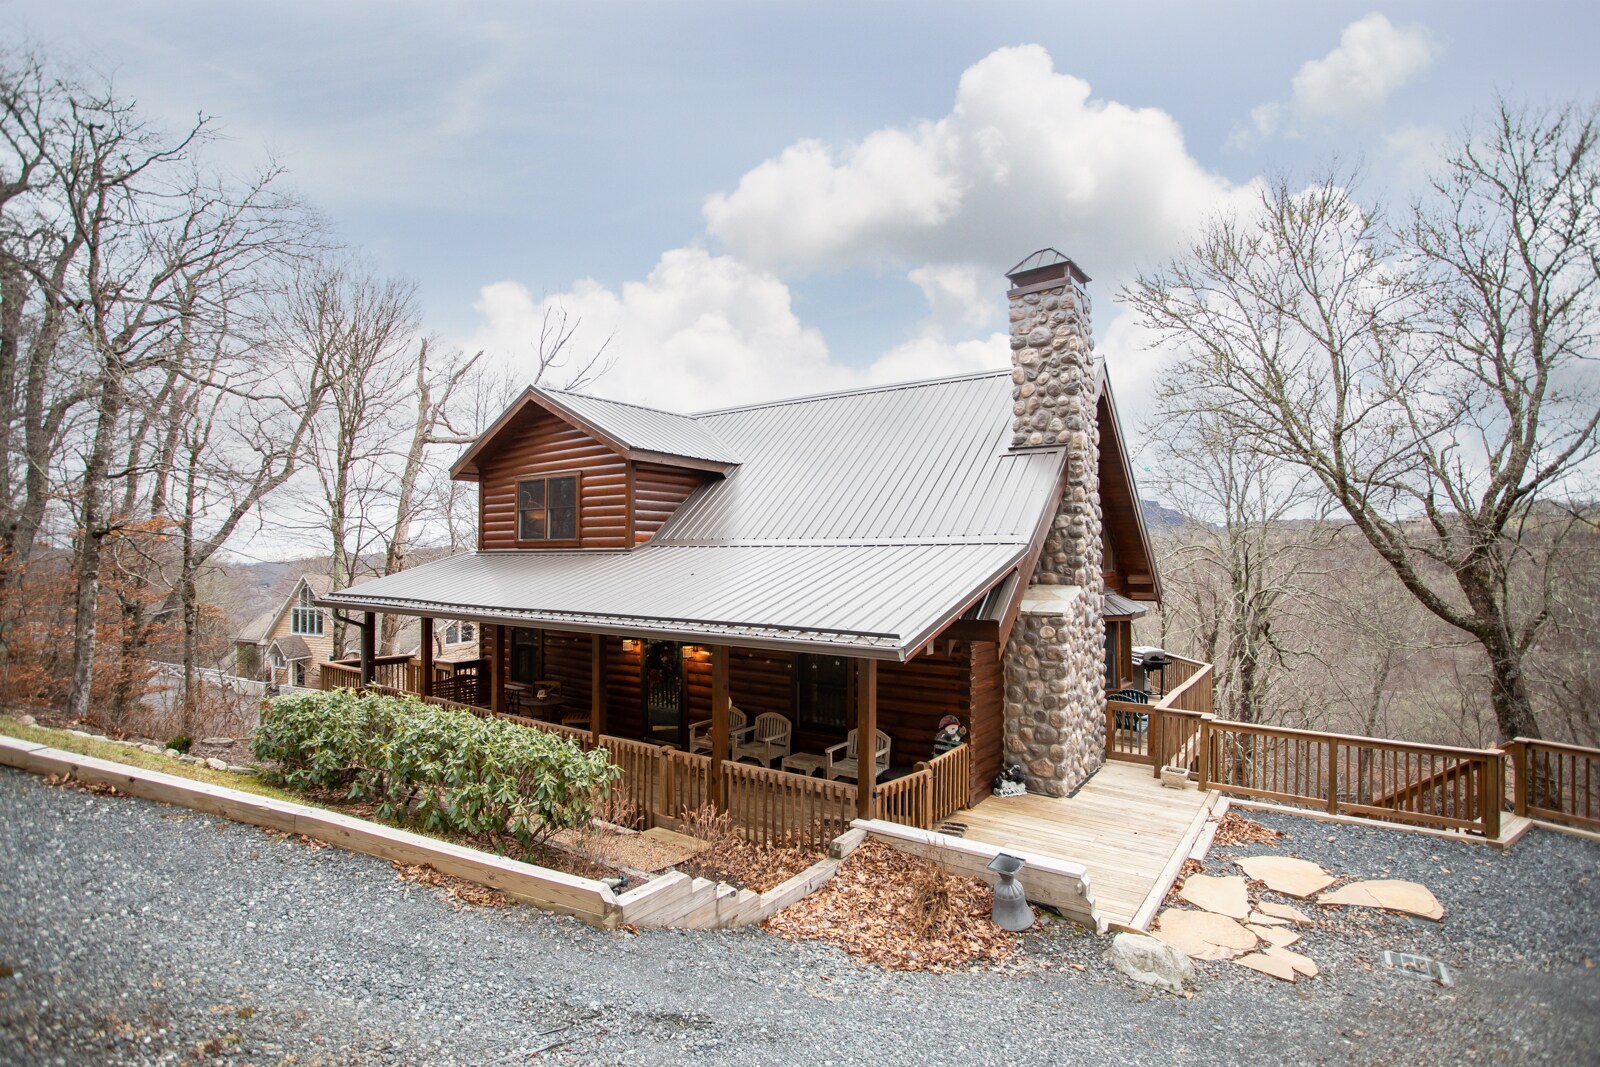 Sugar Bear is a Charming Log Cabin with Standing Seam Metal Roof and River Rock Chimney